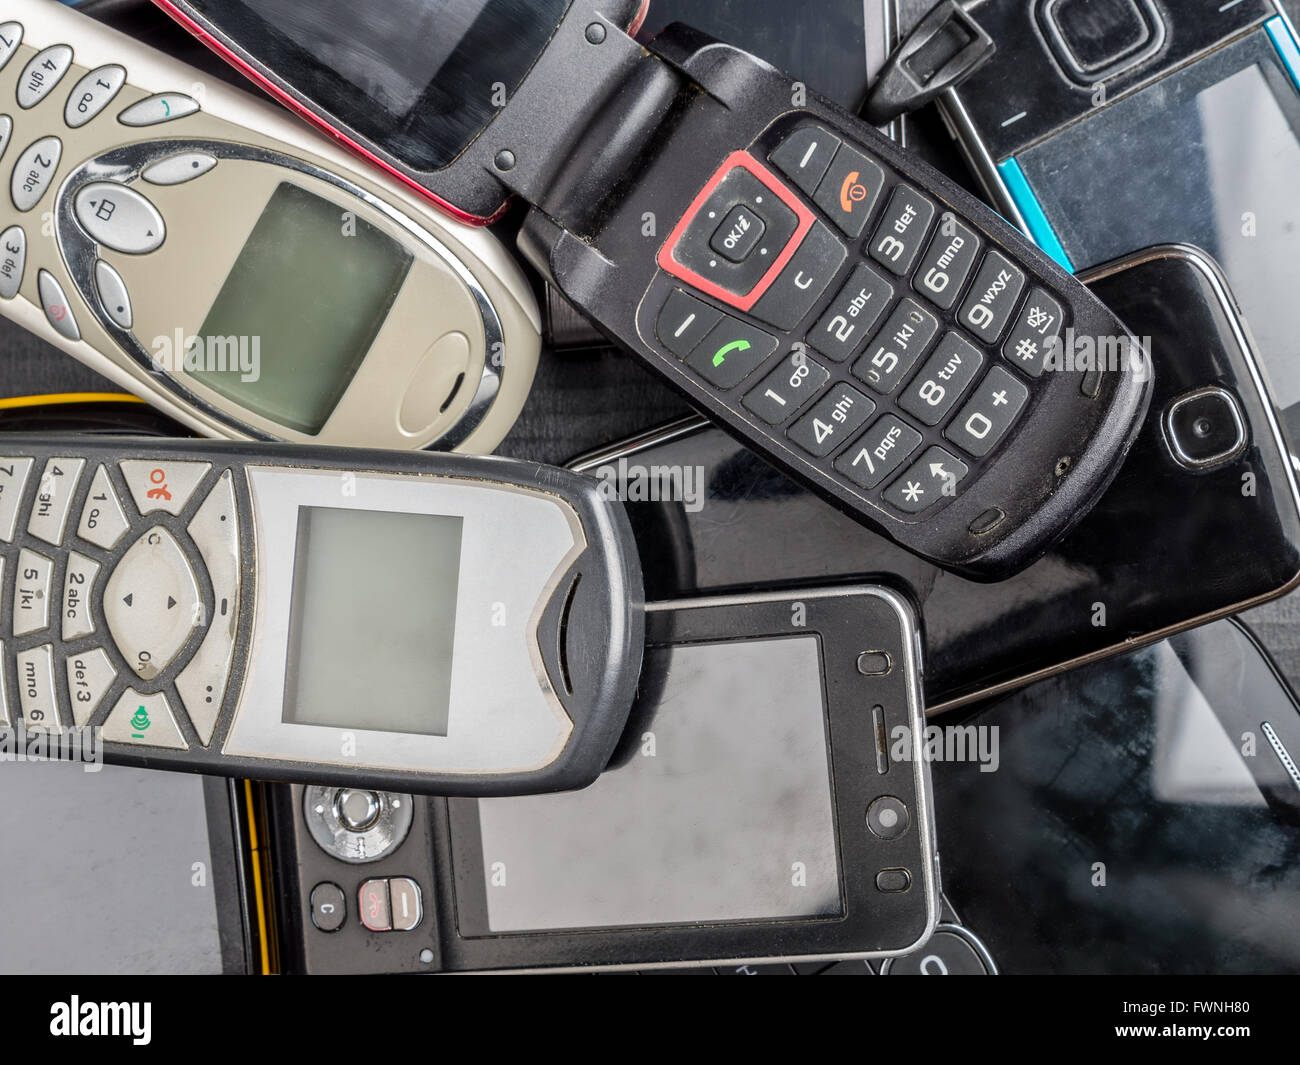 Pile of old and used mobile phones Stock Photo